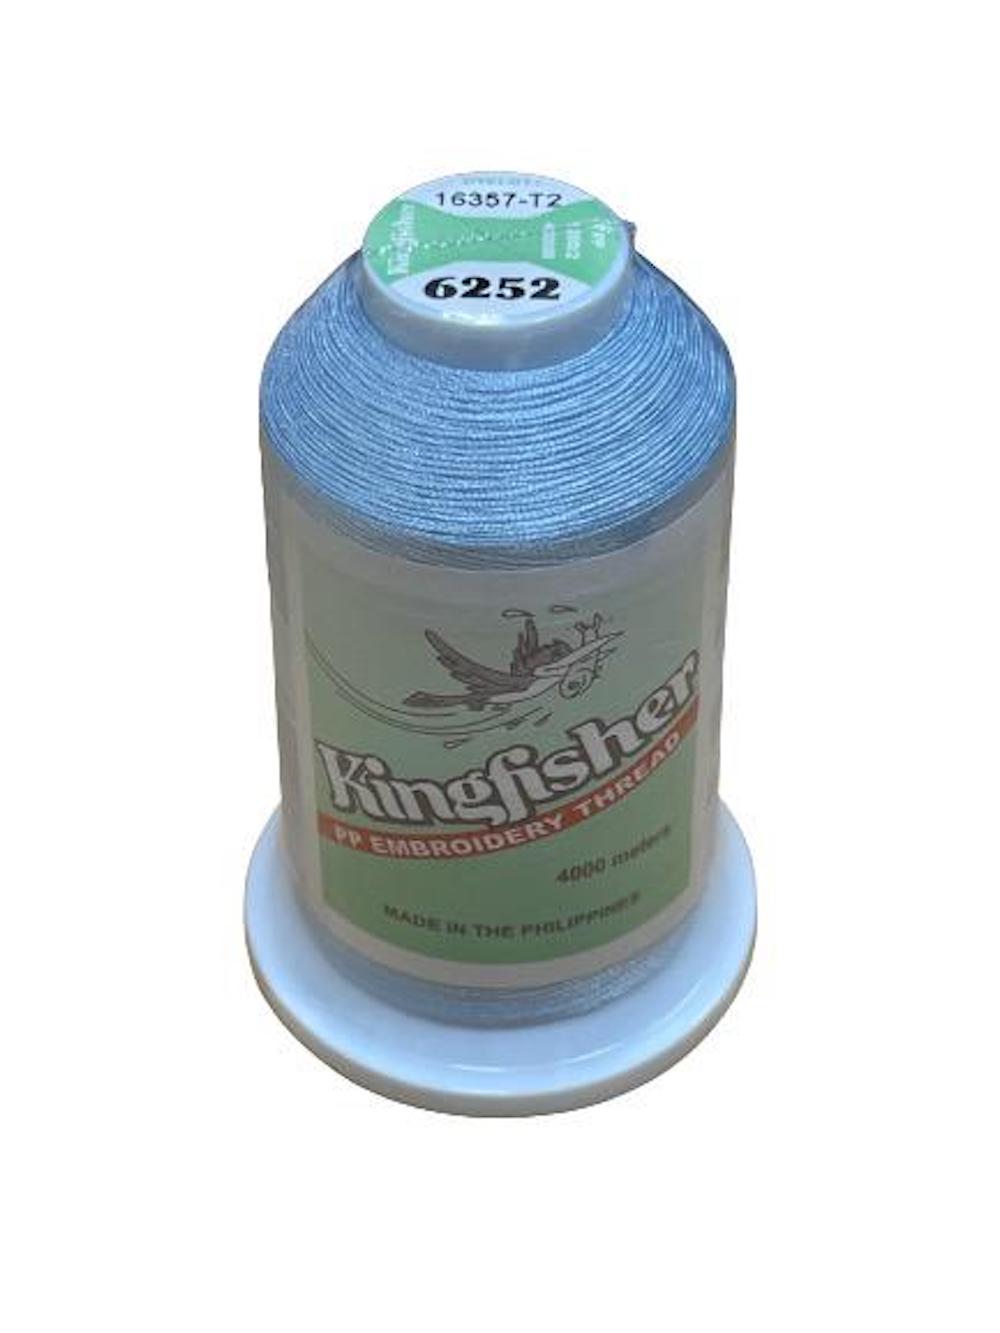 King Fisher Embroidery Thread 4000m 6252 - MY SEWING MALL